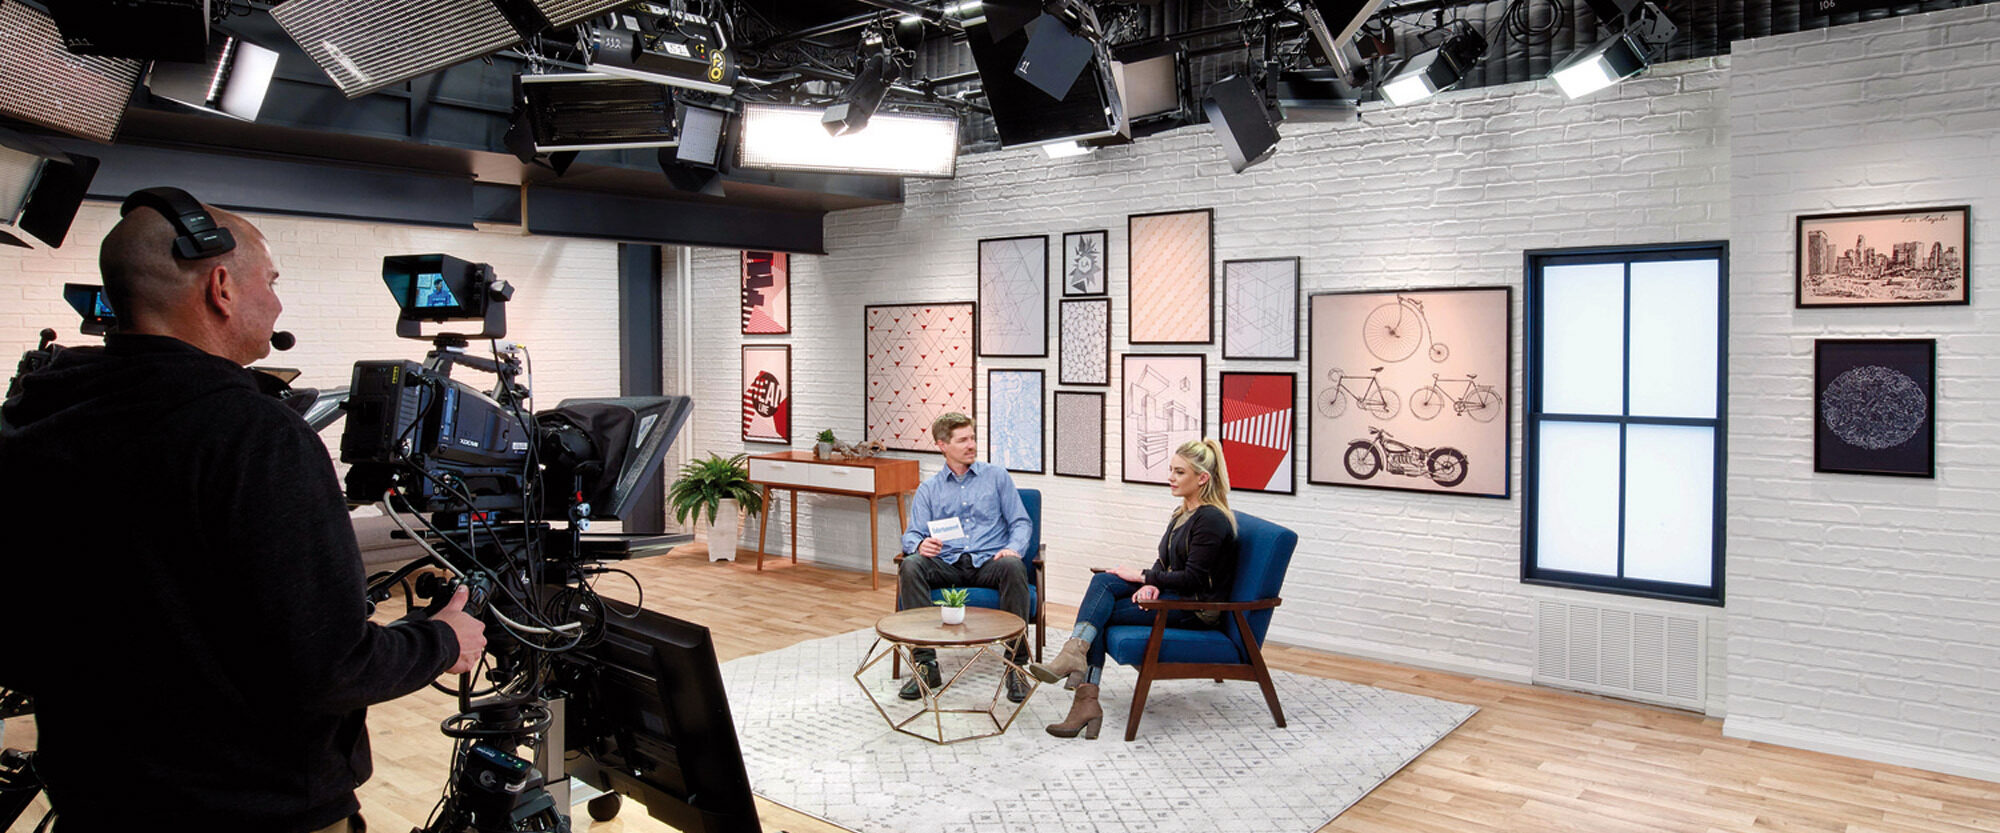 Contemporary television studio with two guests seated on minimalist furniture, under focused lighting, with a textured white brick wall adorned with assorted framed artwork in the background.